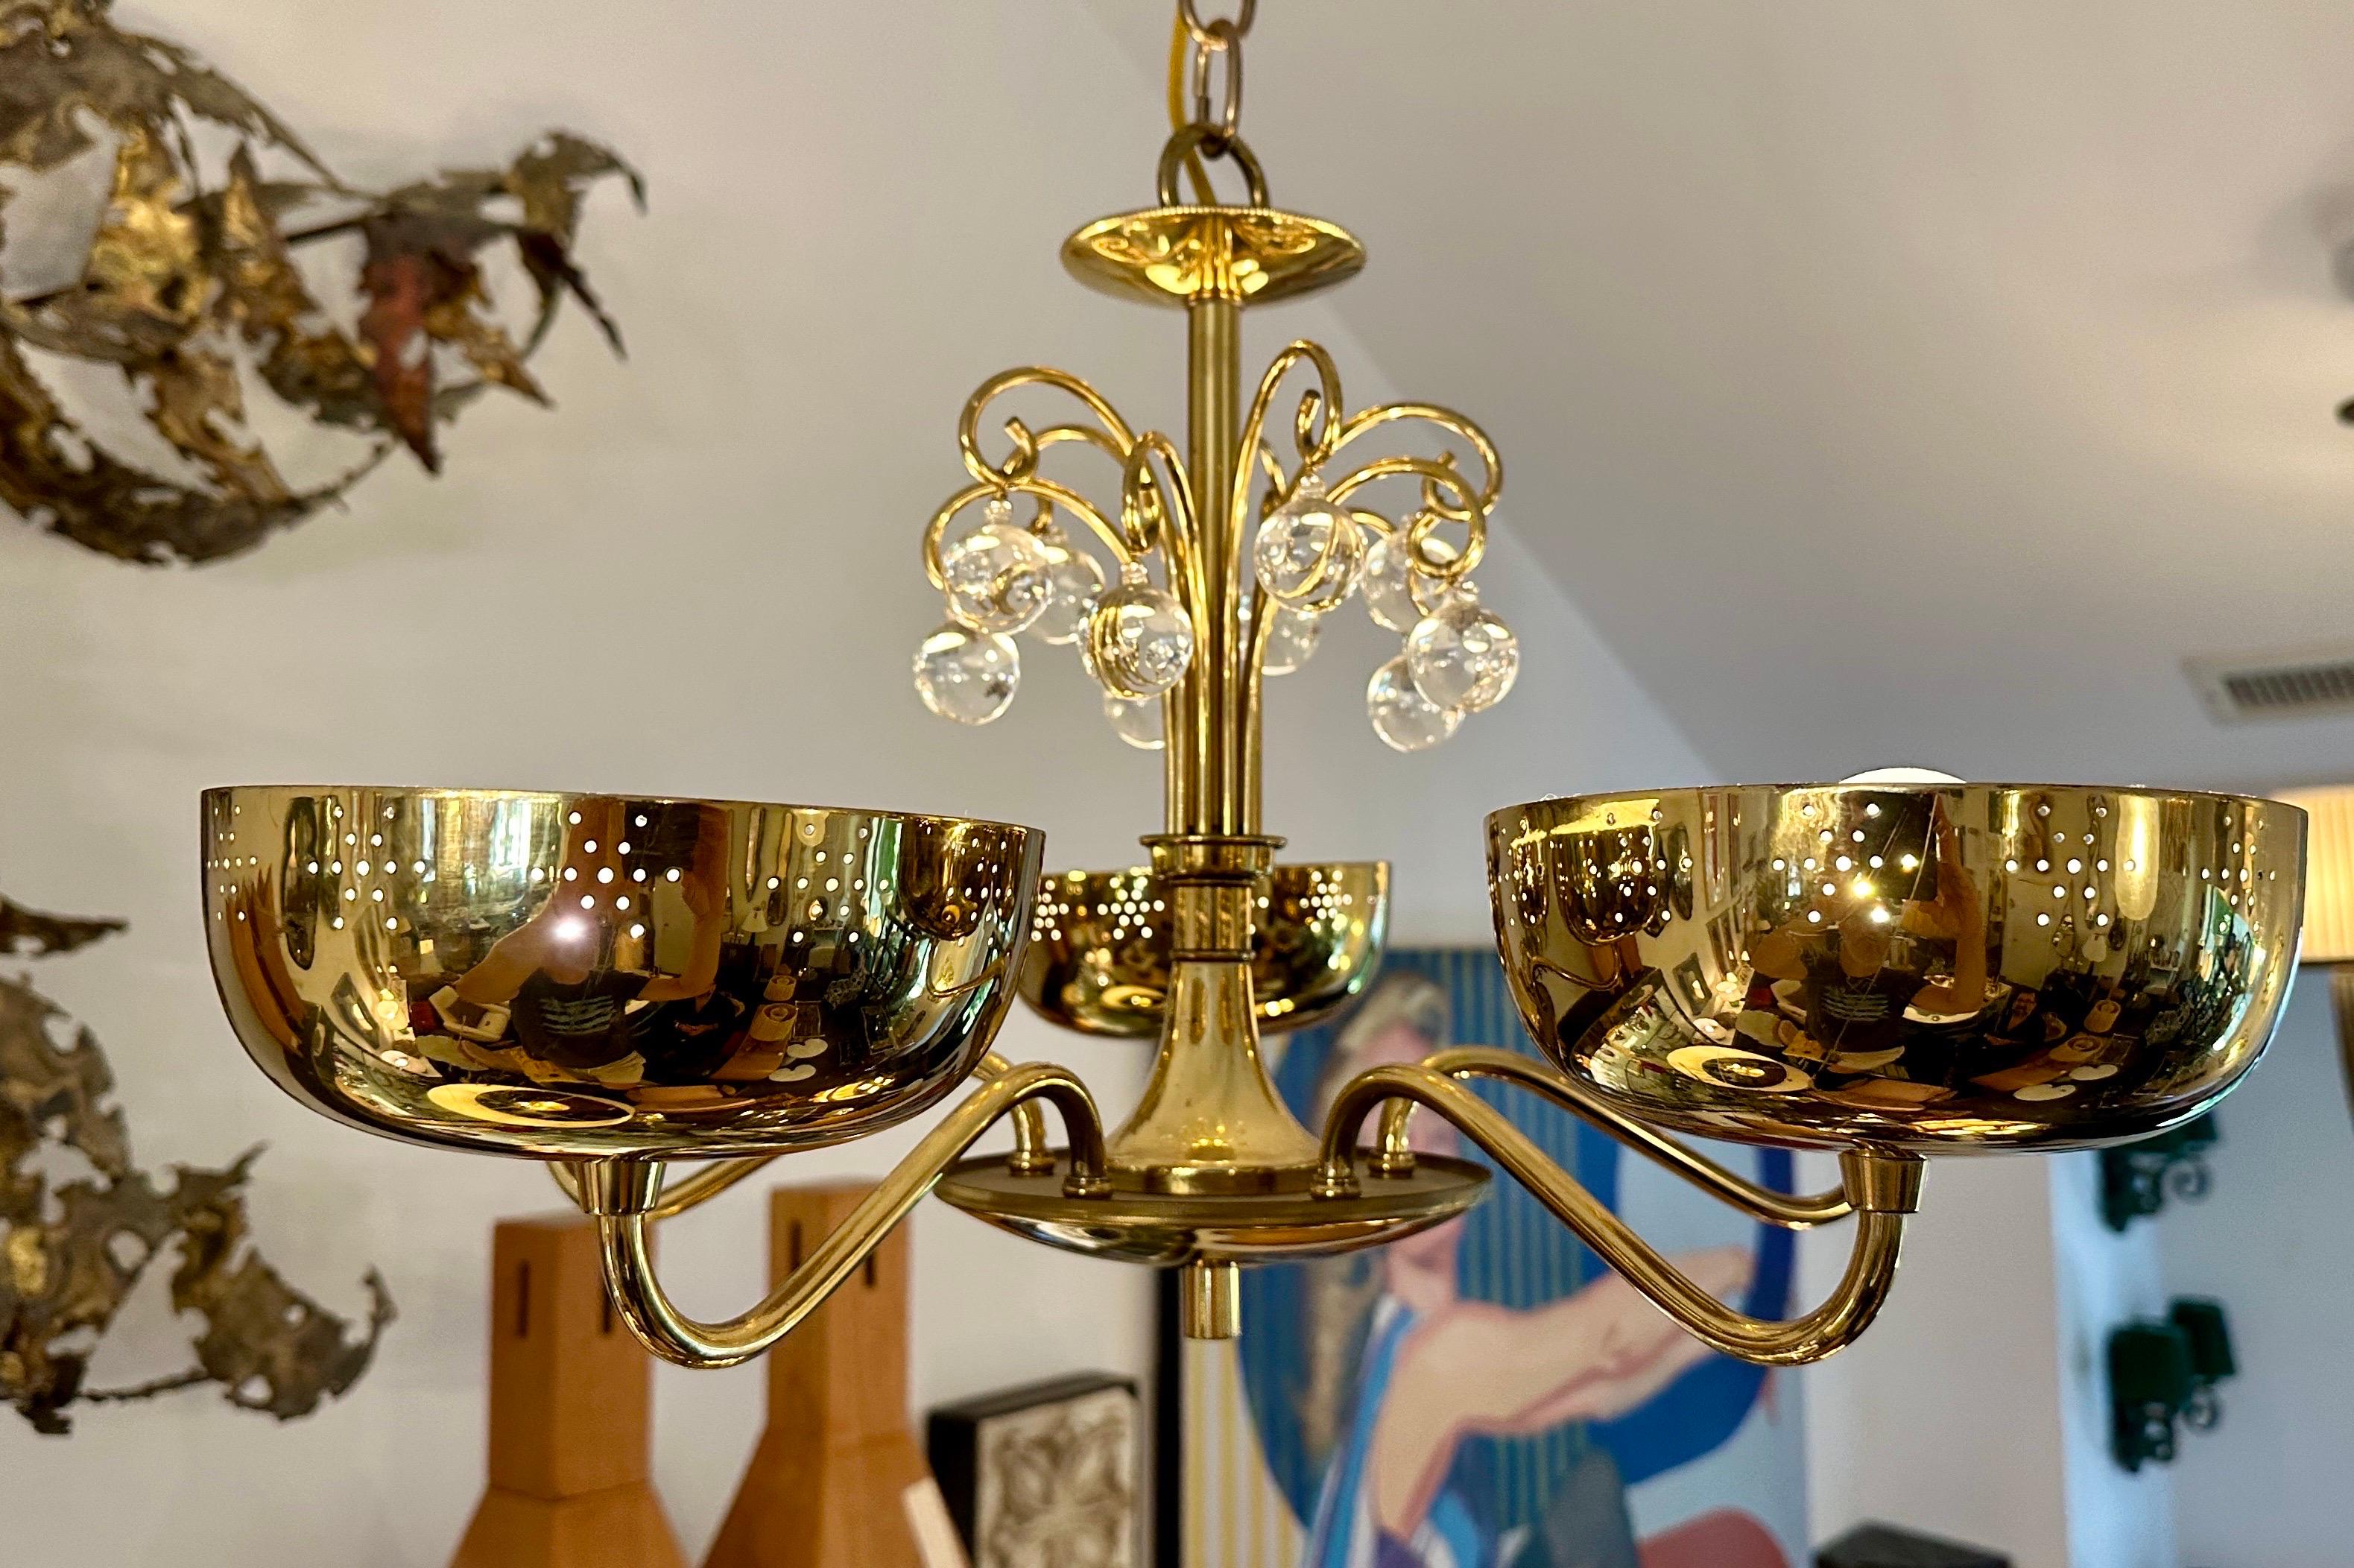 The 5 brass cup style diffusers are perforated with stars design.  This is a flush mount light fixture with crystal orbs adornments.  Made by Lightolier, possibly by Paavo Tynell.  THIS ITEM IS LOCATED AND WILL SHIP FROM OUR EAST HAMPTON, NY